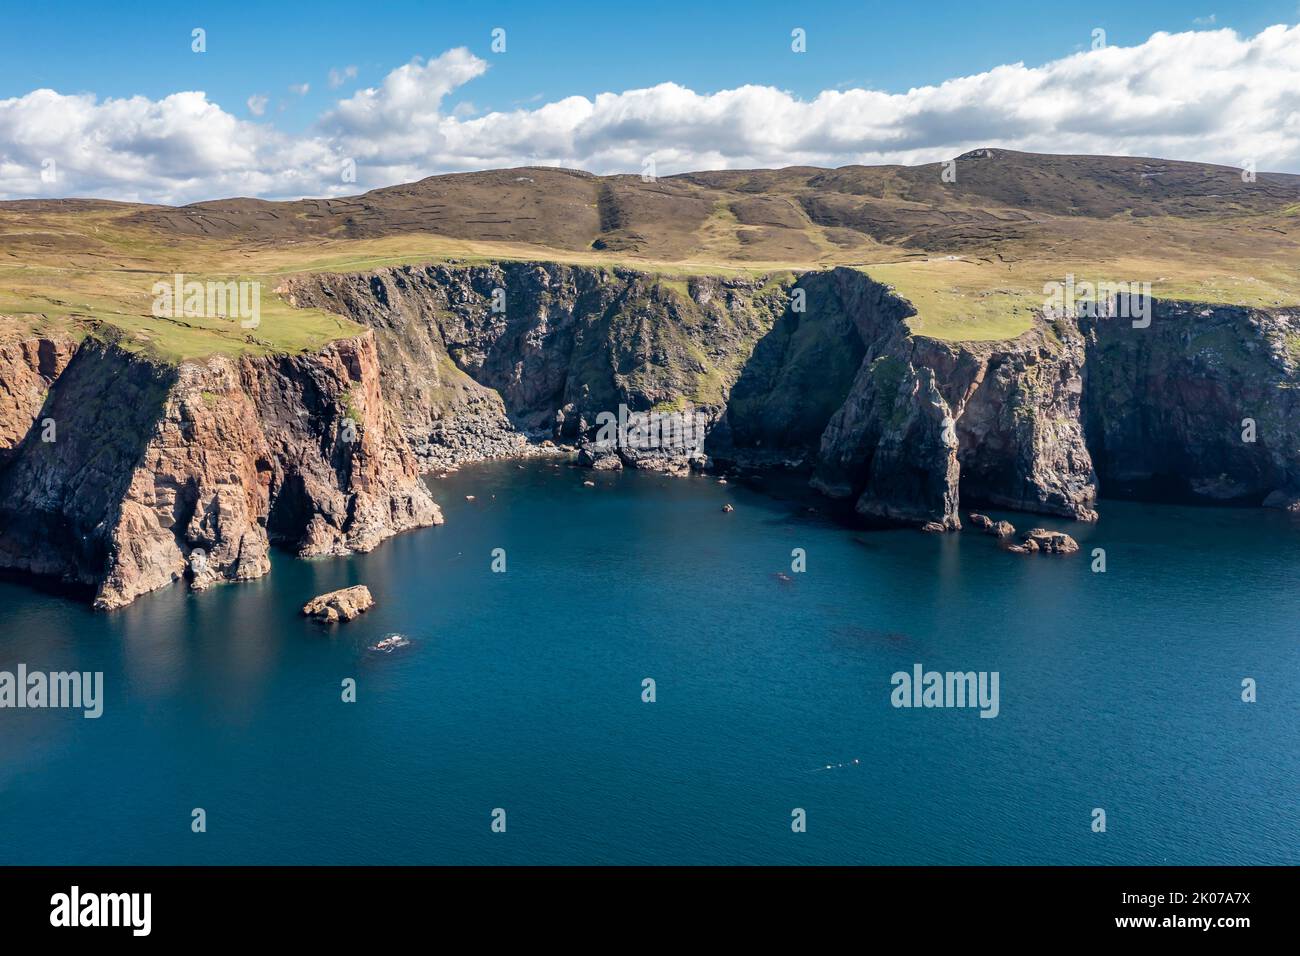 Aerial view of the cliffs near the lighthouse on the island of Arranmore in County Donegal, Ireland. Stock Photo